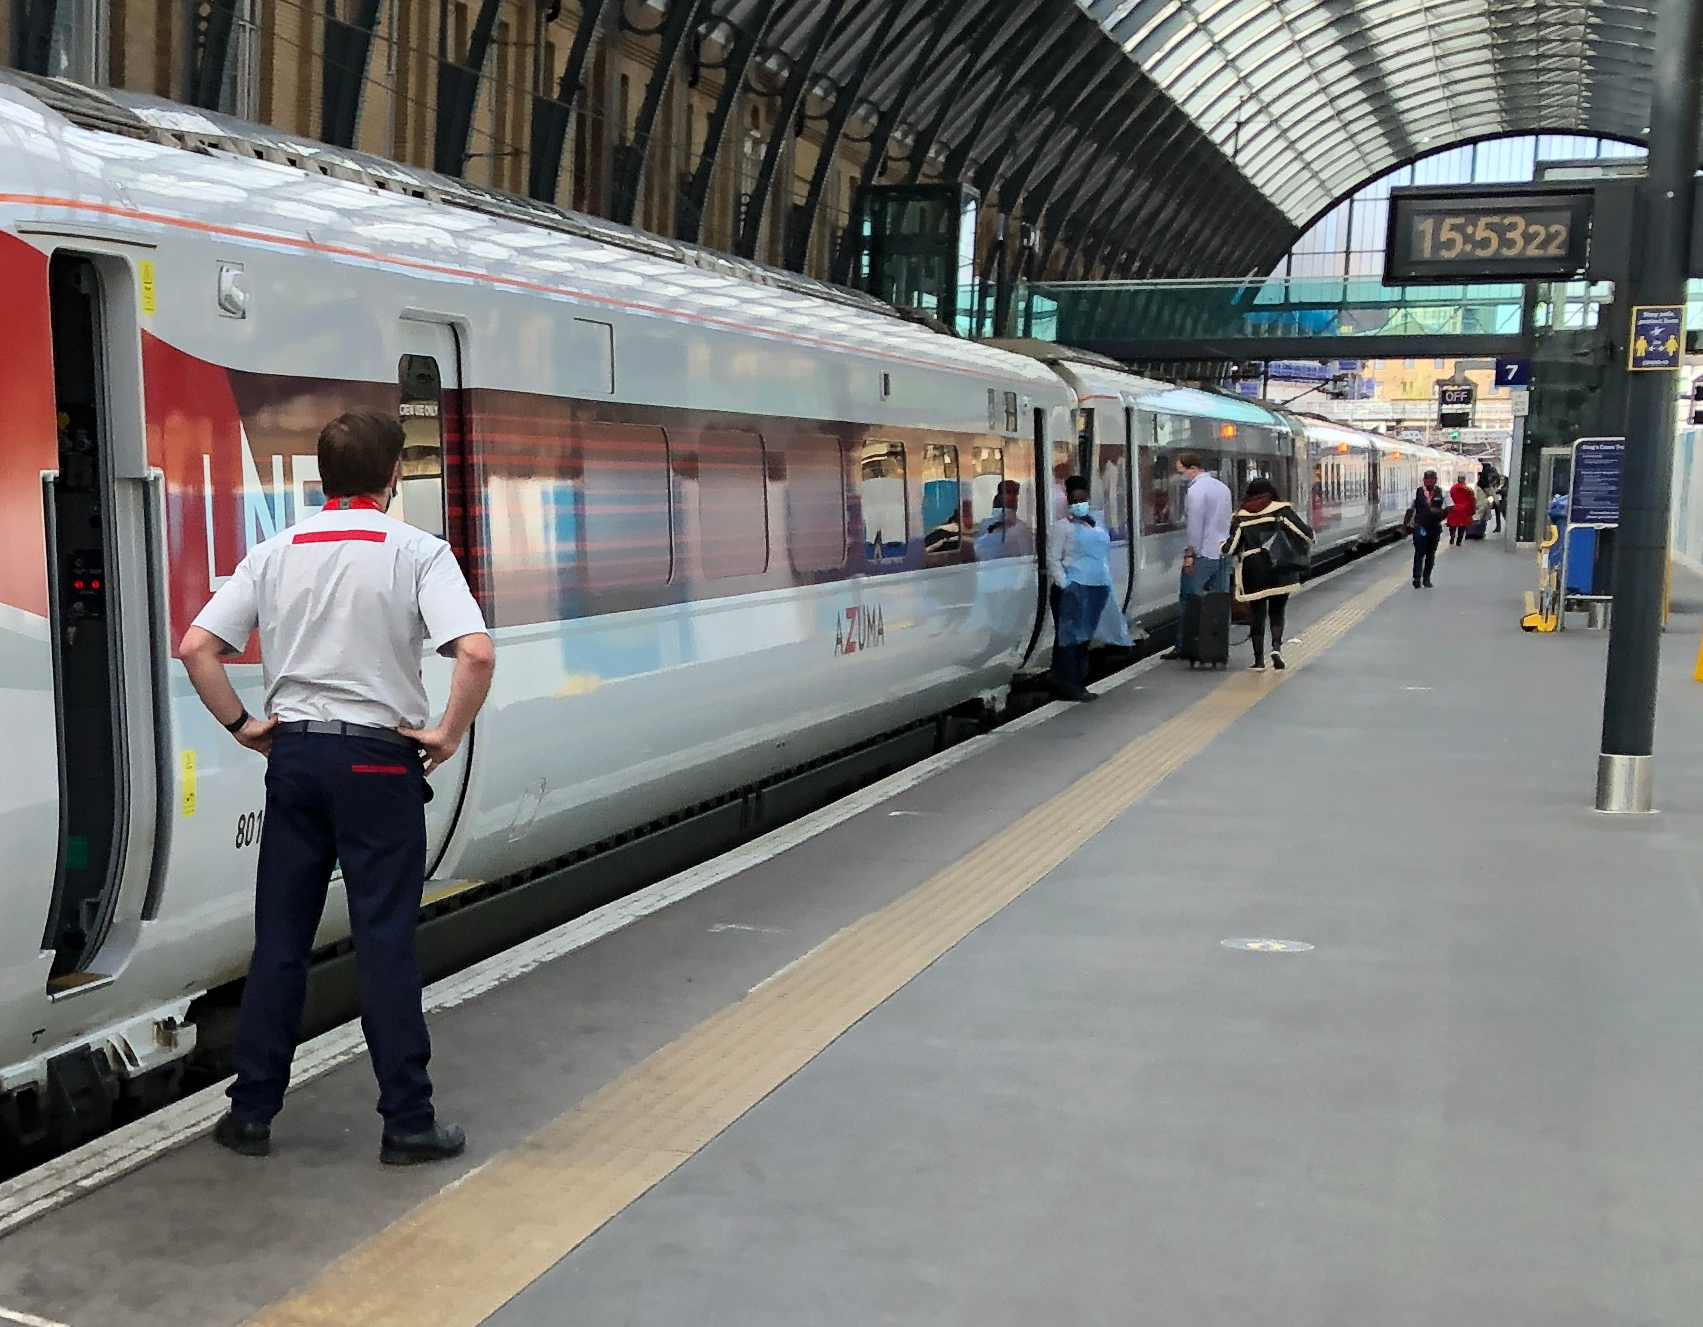 All aboard: LNER Azuma train at King’s Cross station in London